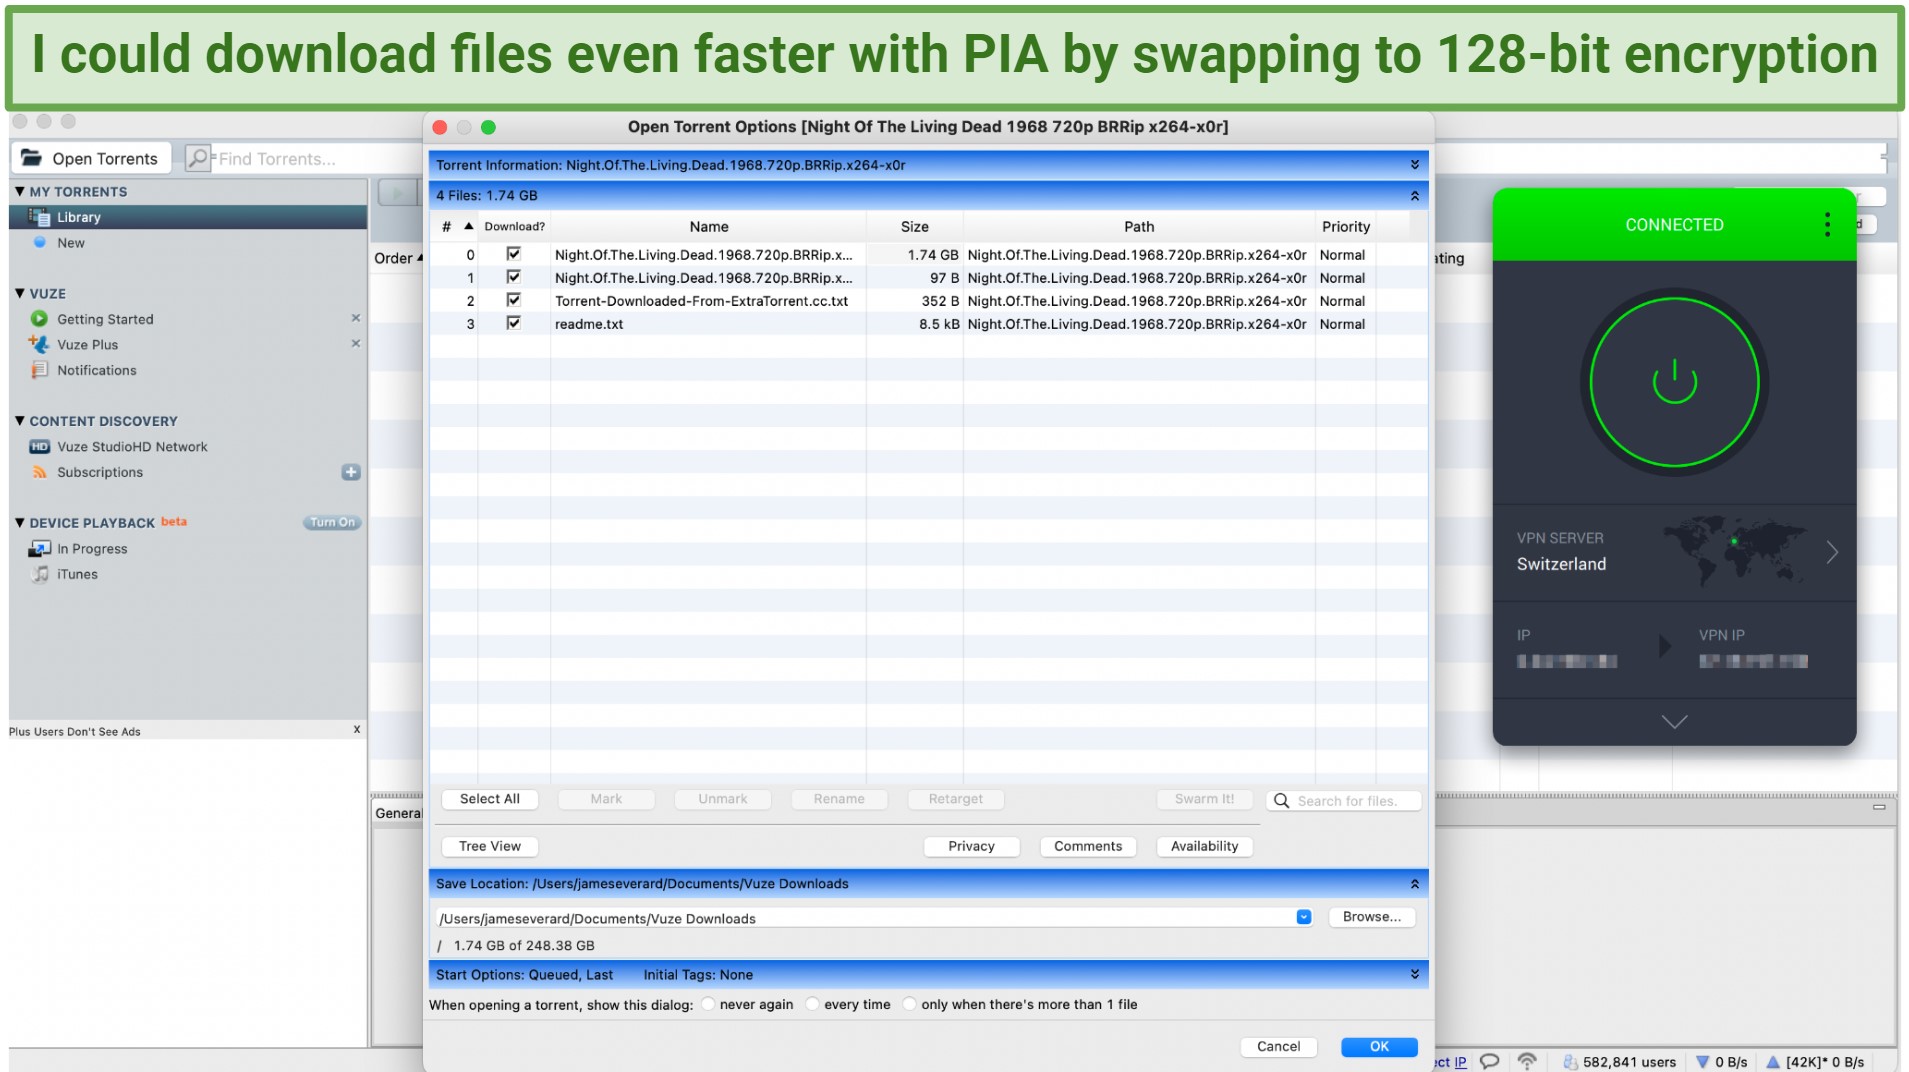 Screenshot of the PIA app over a torrent download client